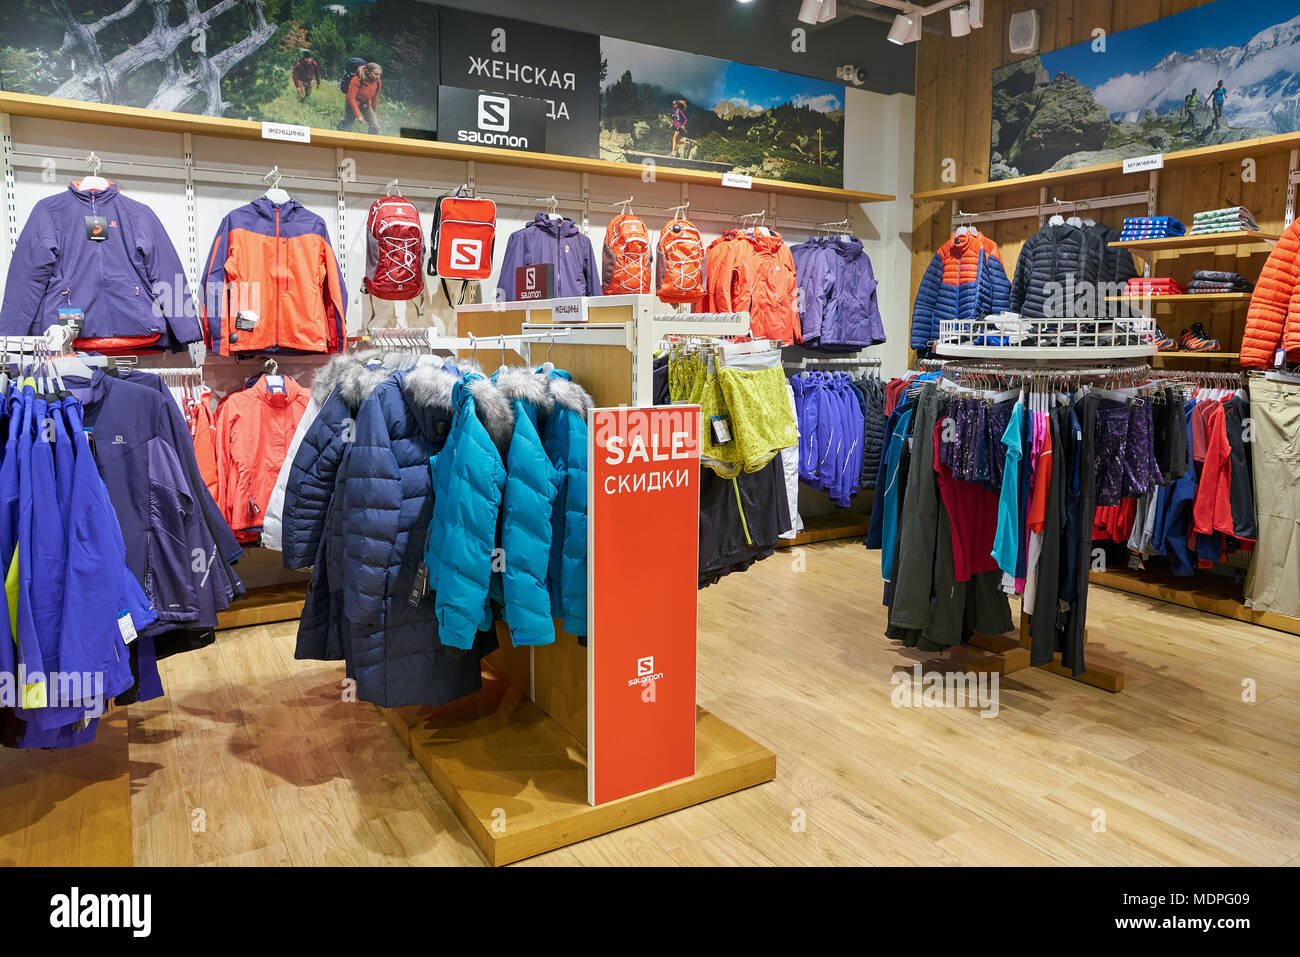 SAINT PETERSBURG, RUSSIA - CIRCA OCTOBER, 2017: inside Salomon store in Saint Petersburg. The Salomon Group is a sports equipment manufacturing compan Photo - Alamy